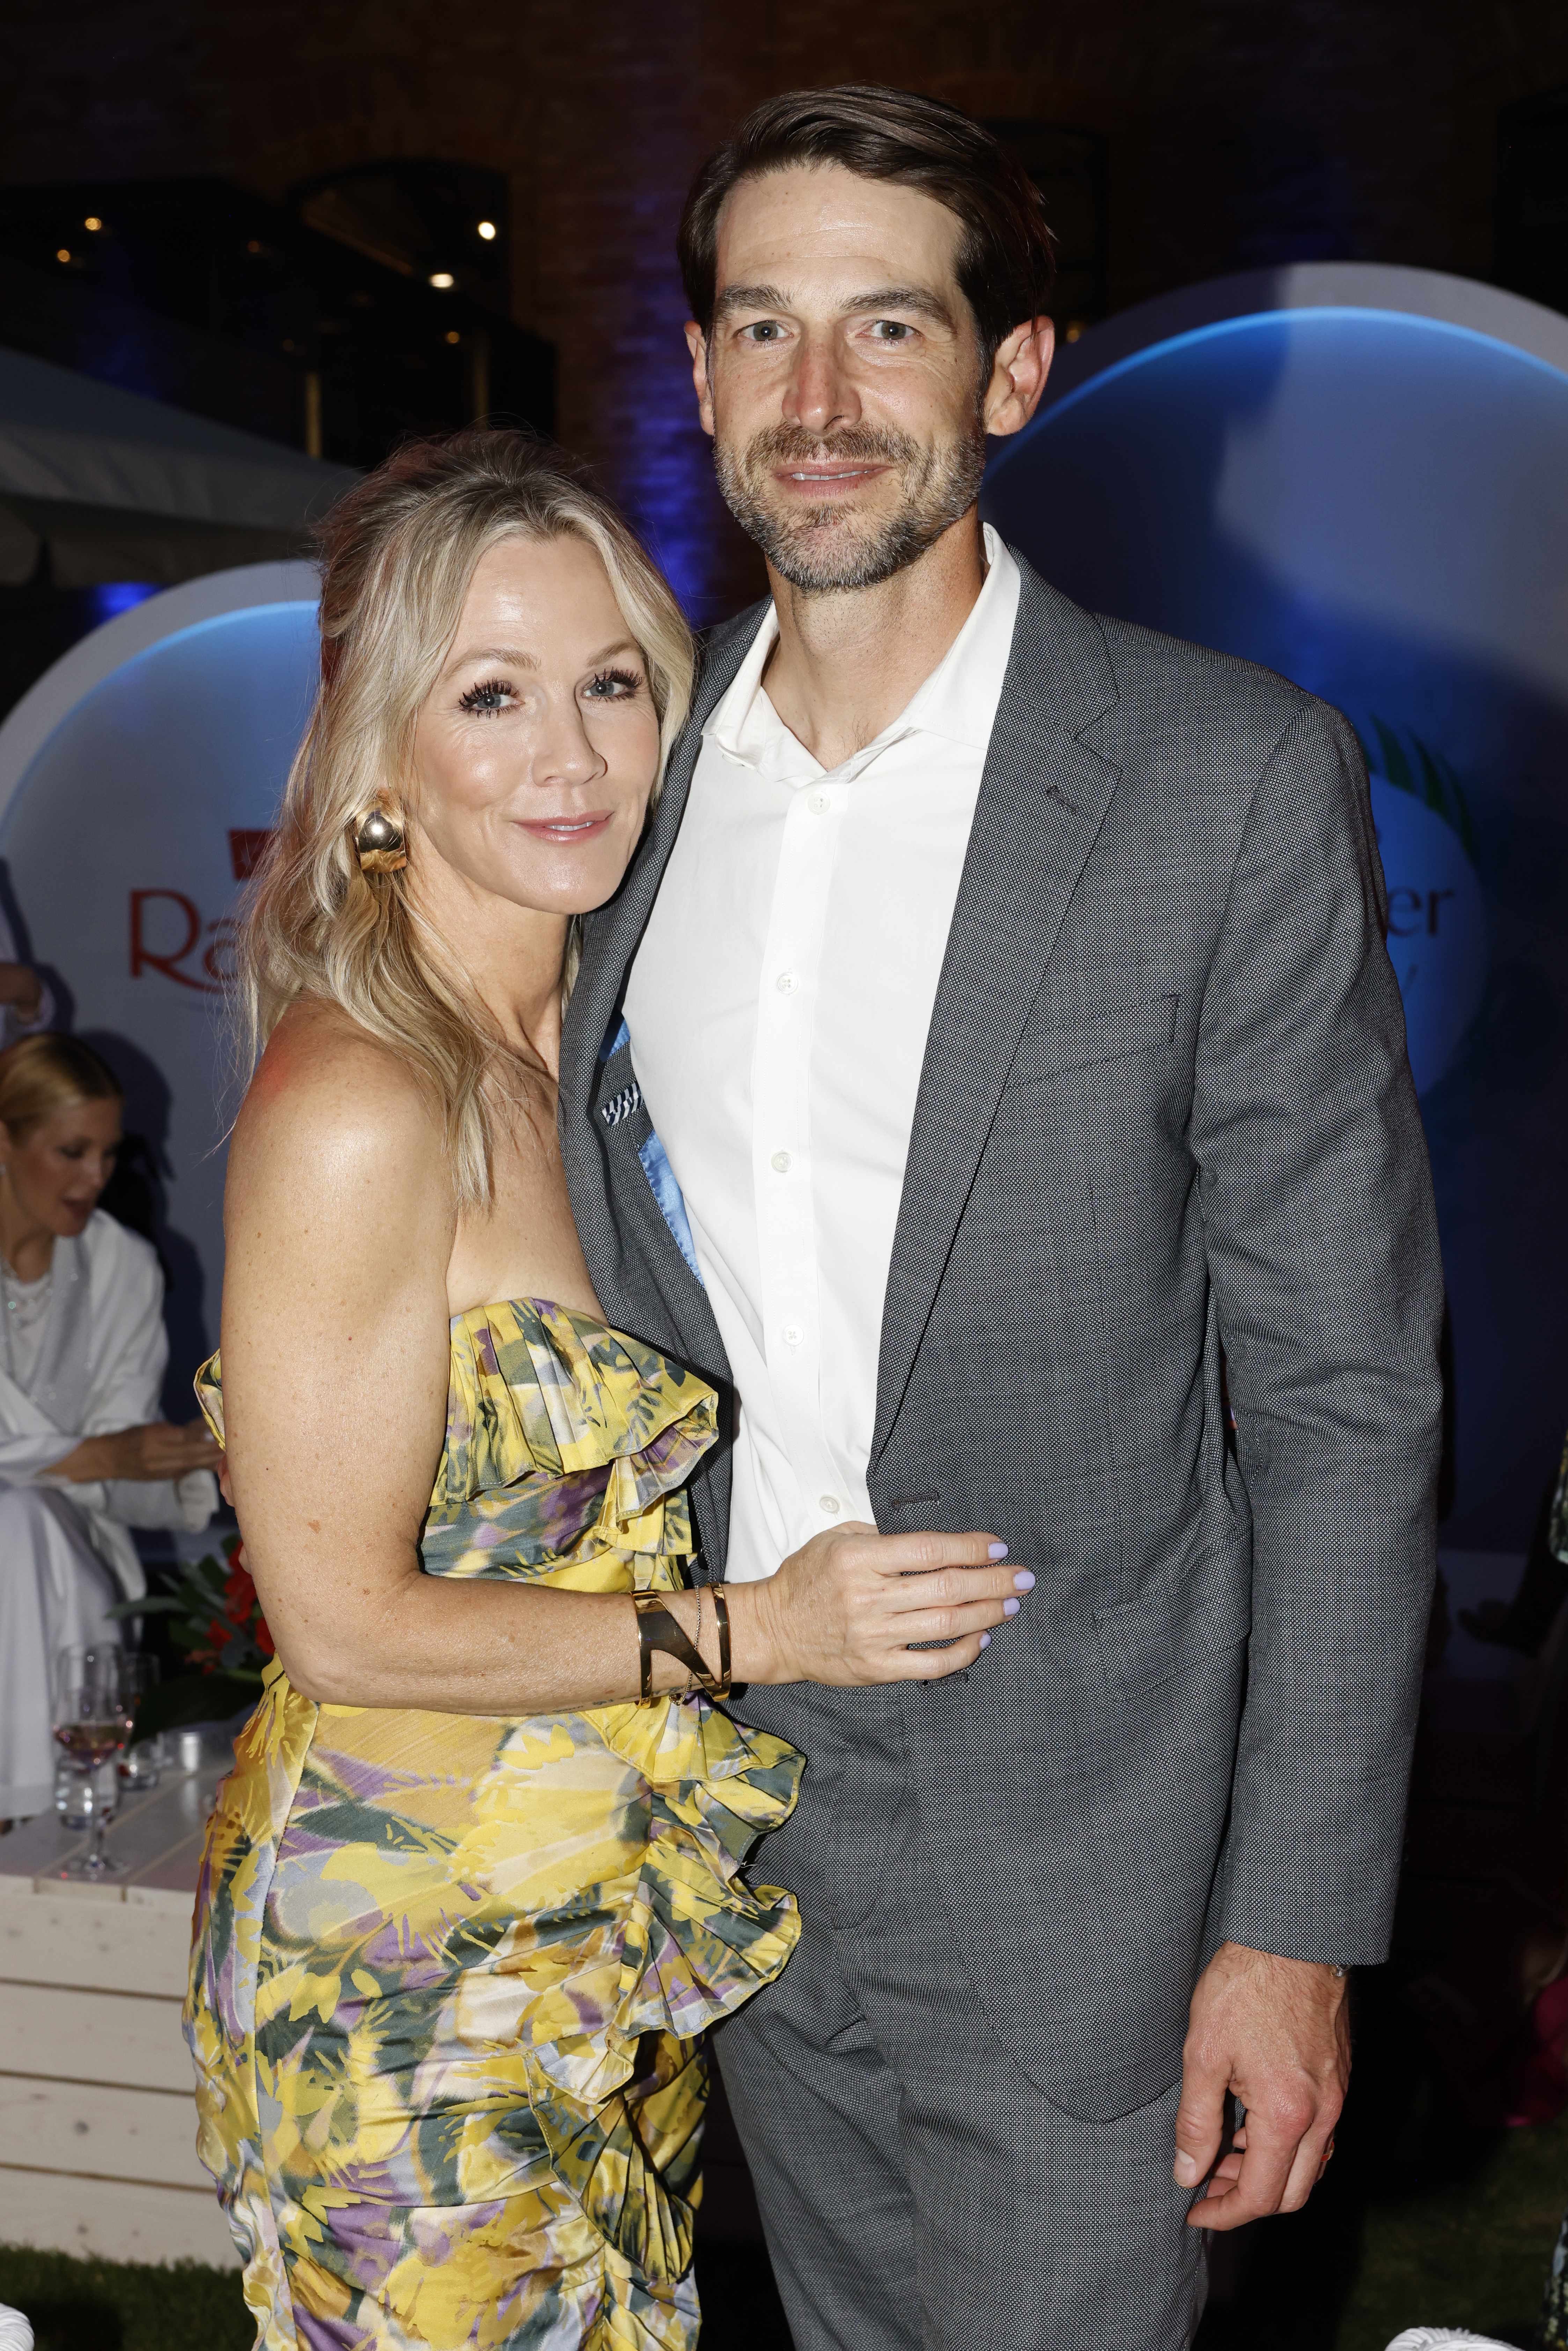 Jennie Garth and Dave Abrams tied the knot on July 11, 2015